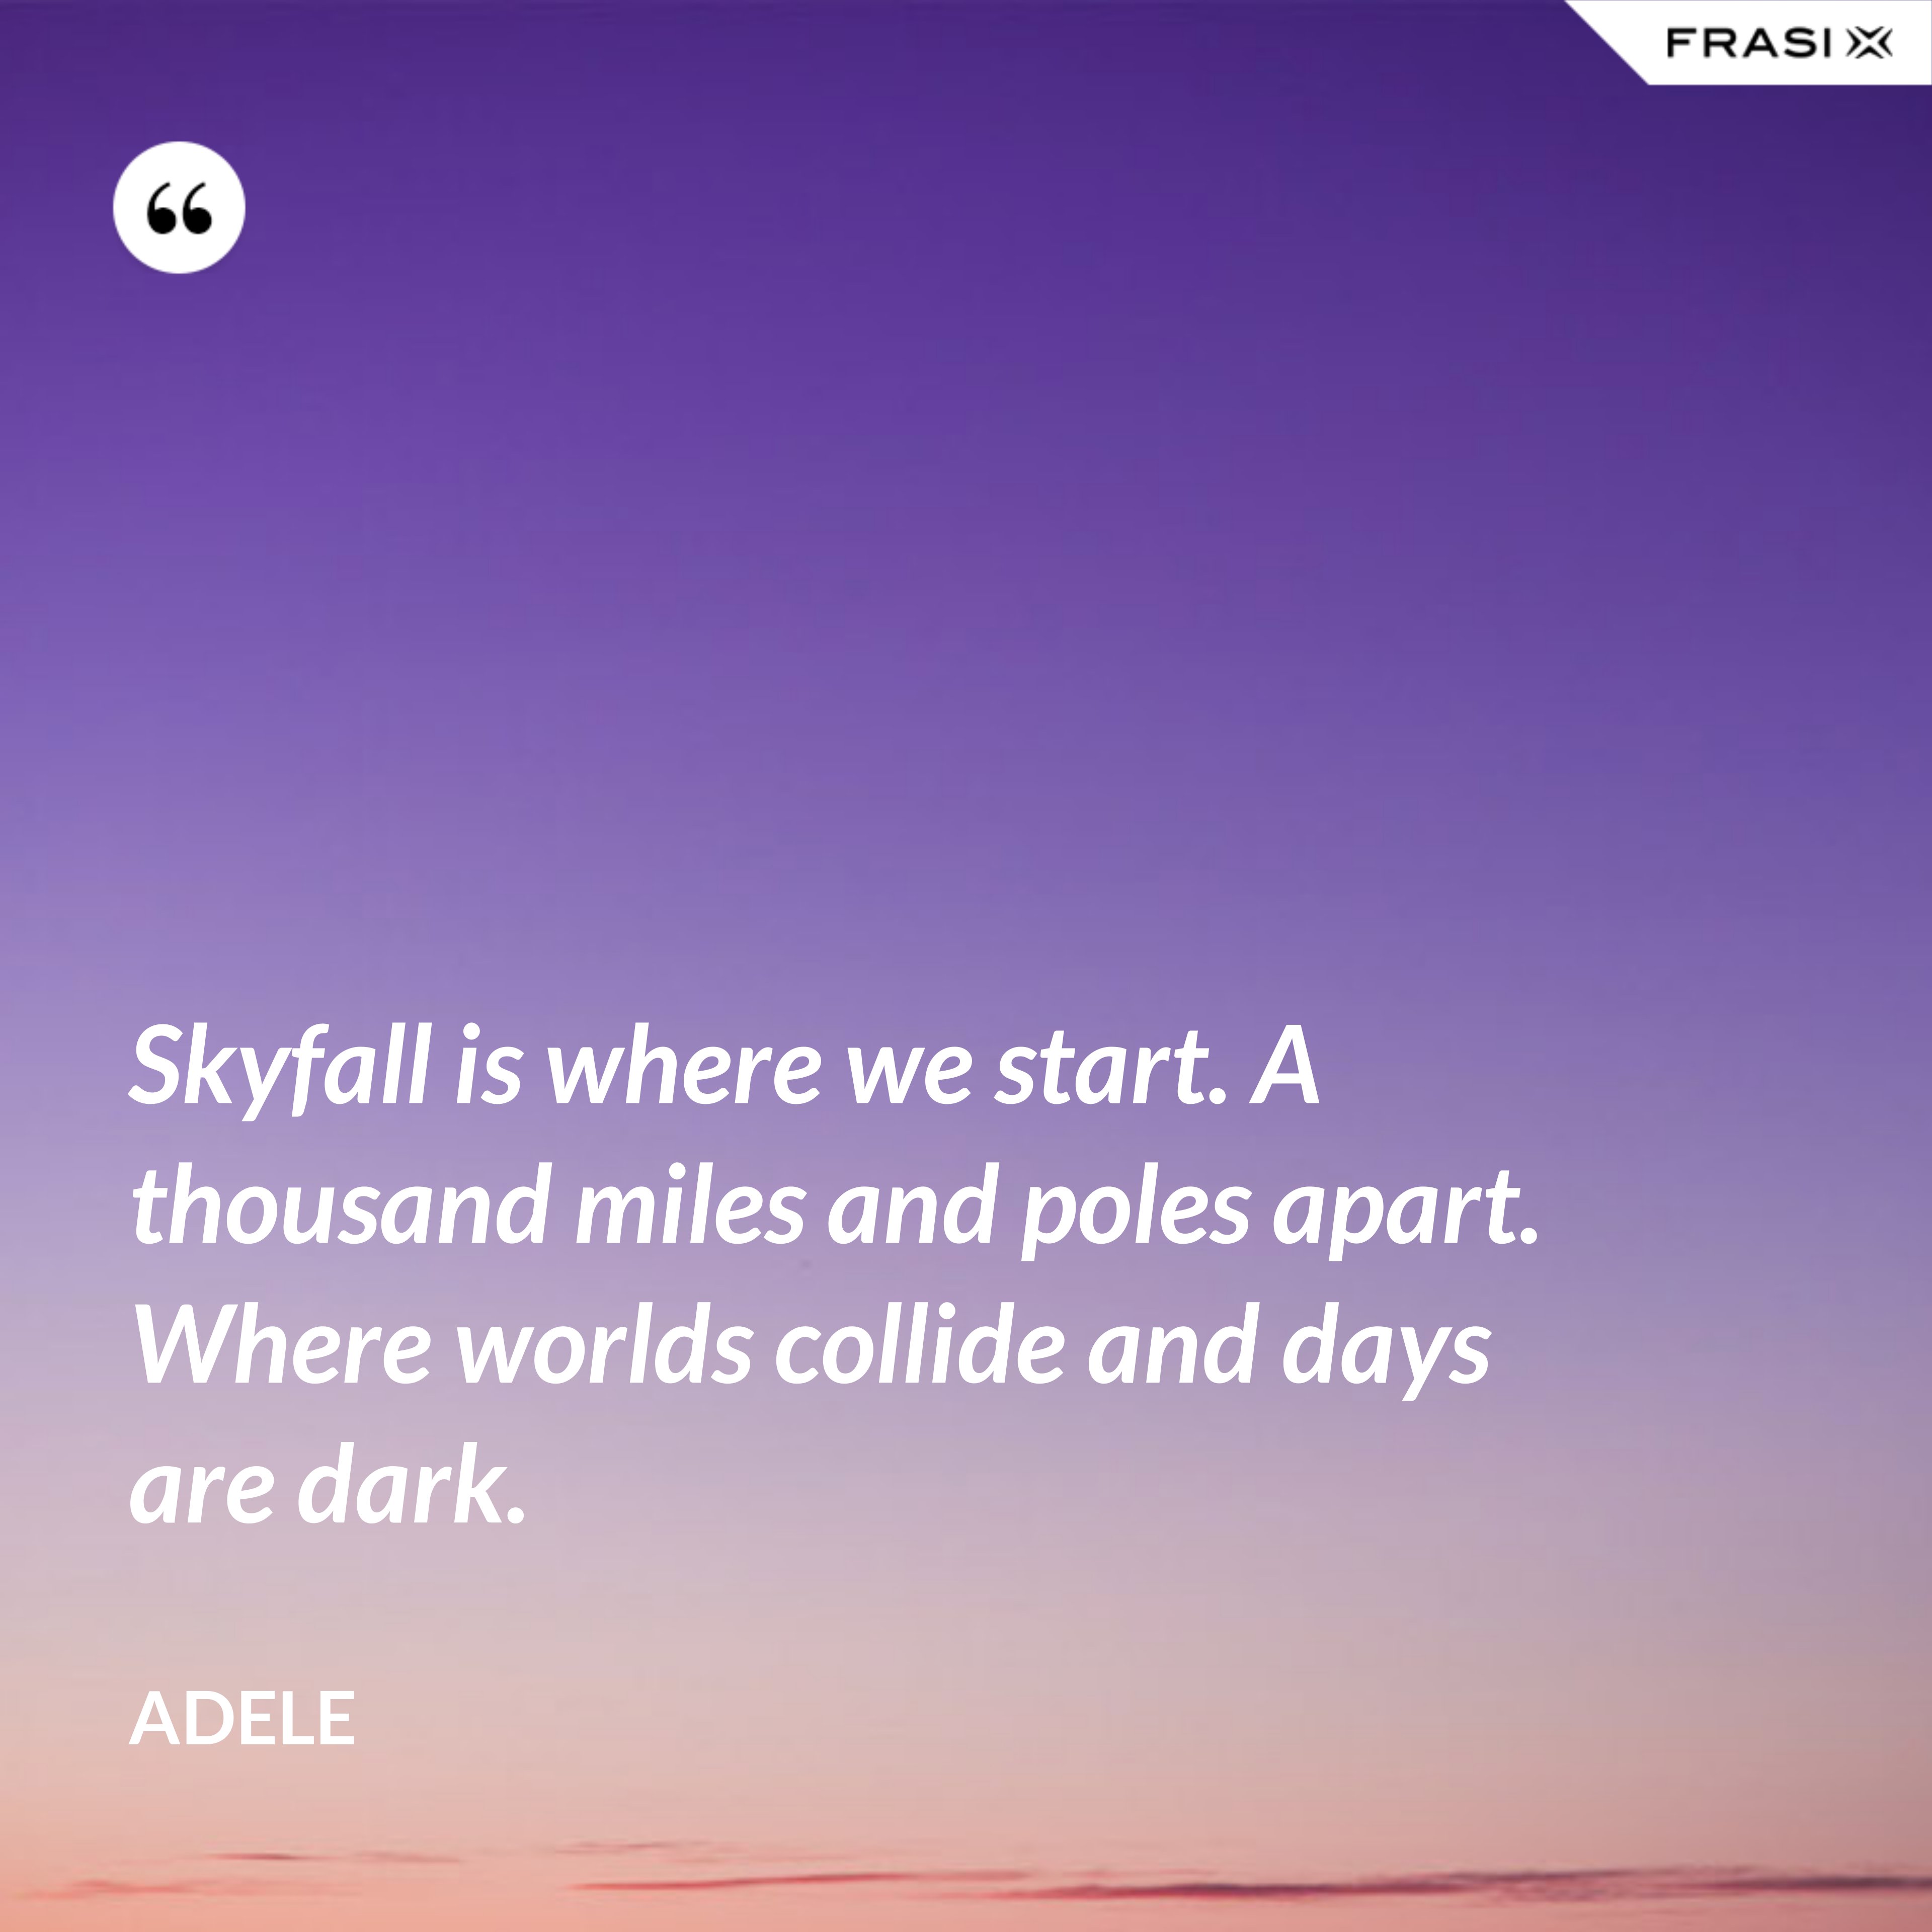 Skyfall is where we start. A thousand miles and poles apart. Where worlds collide and days are dark. - Adele